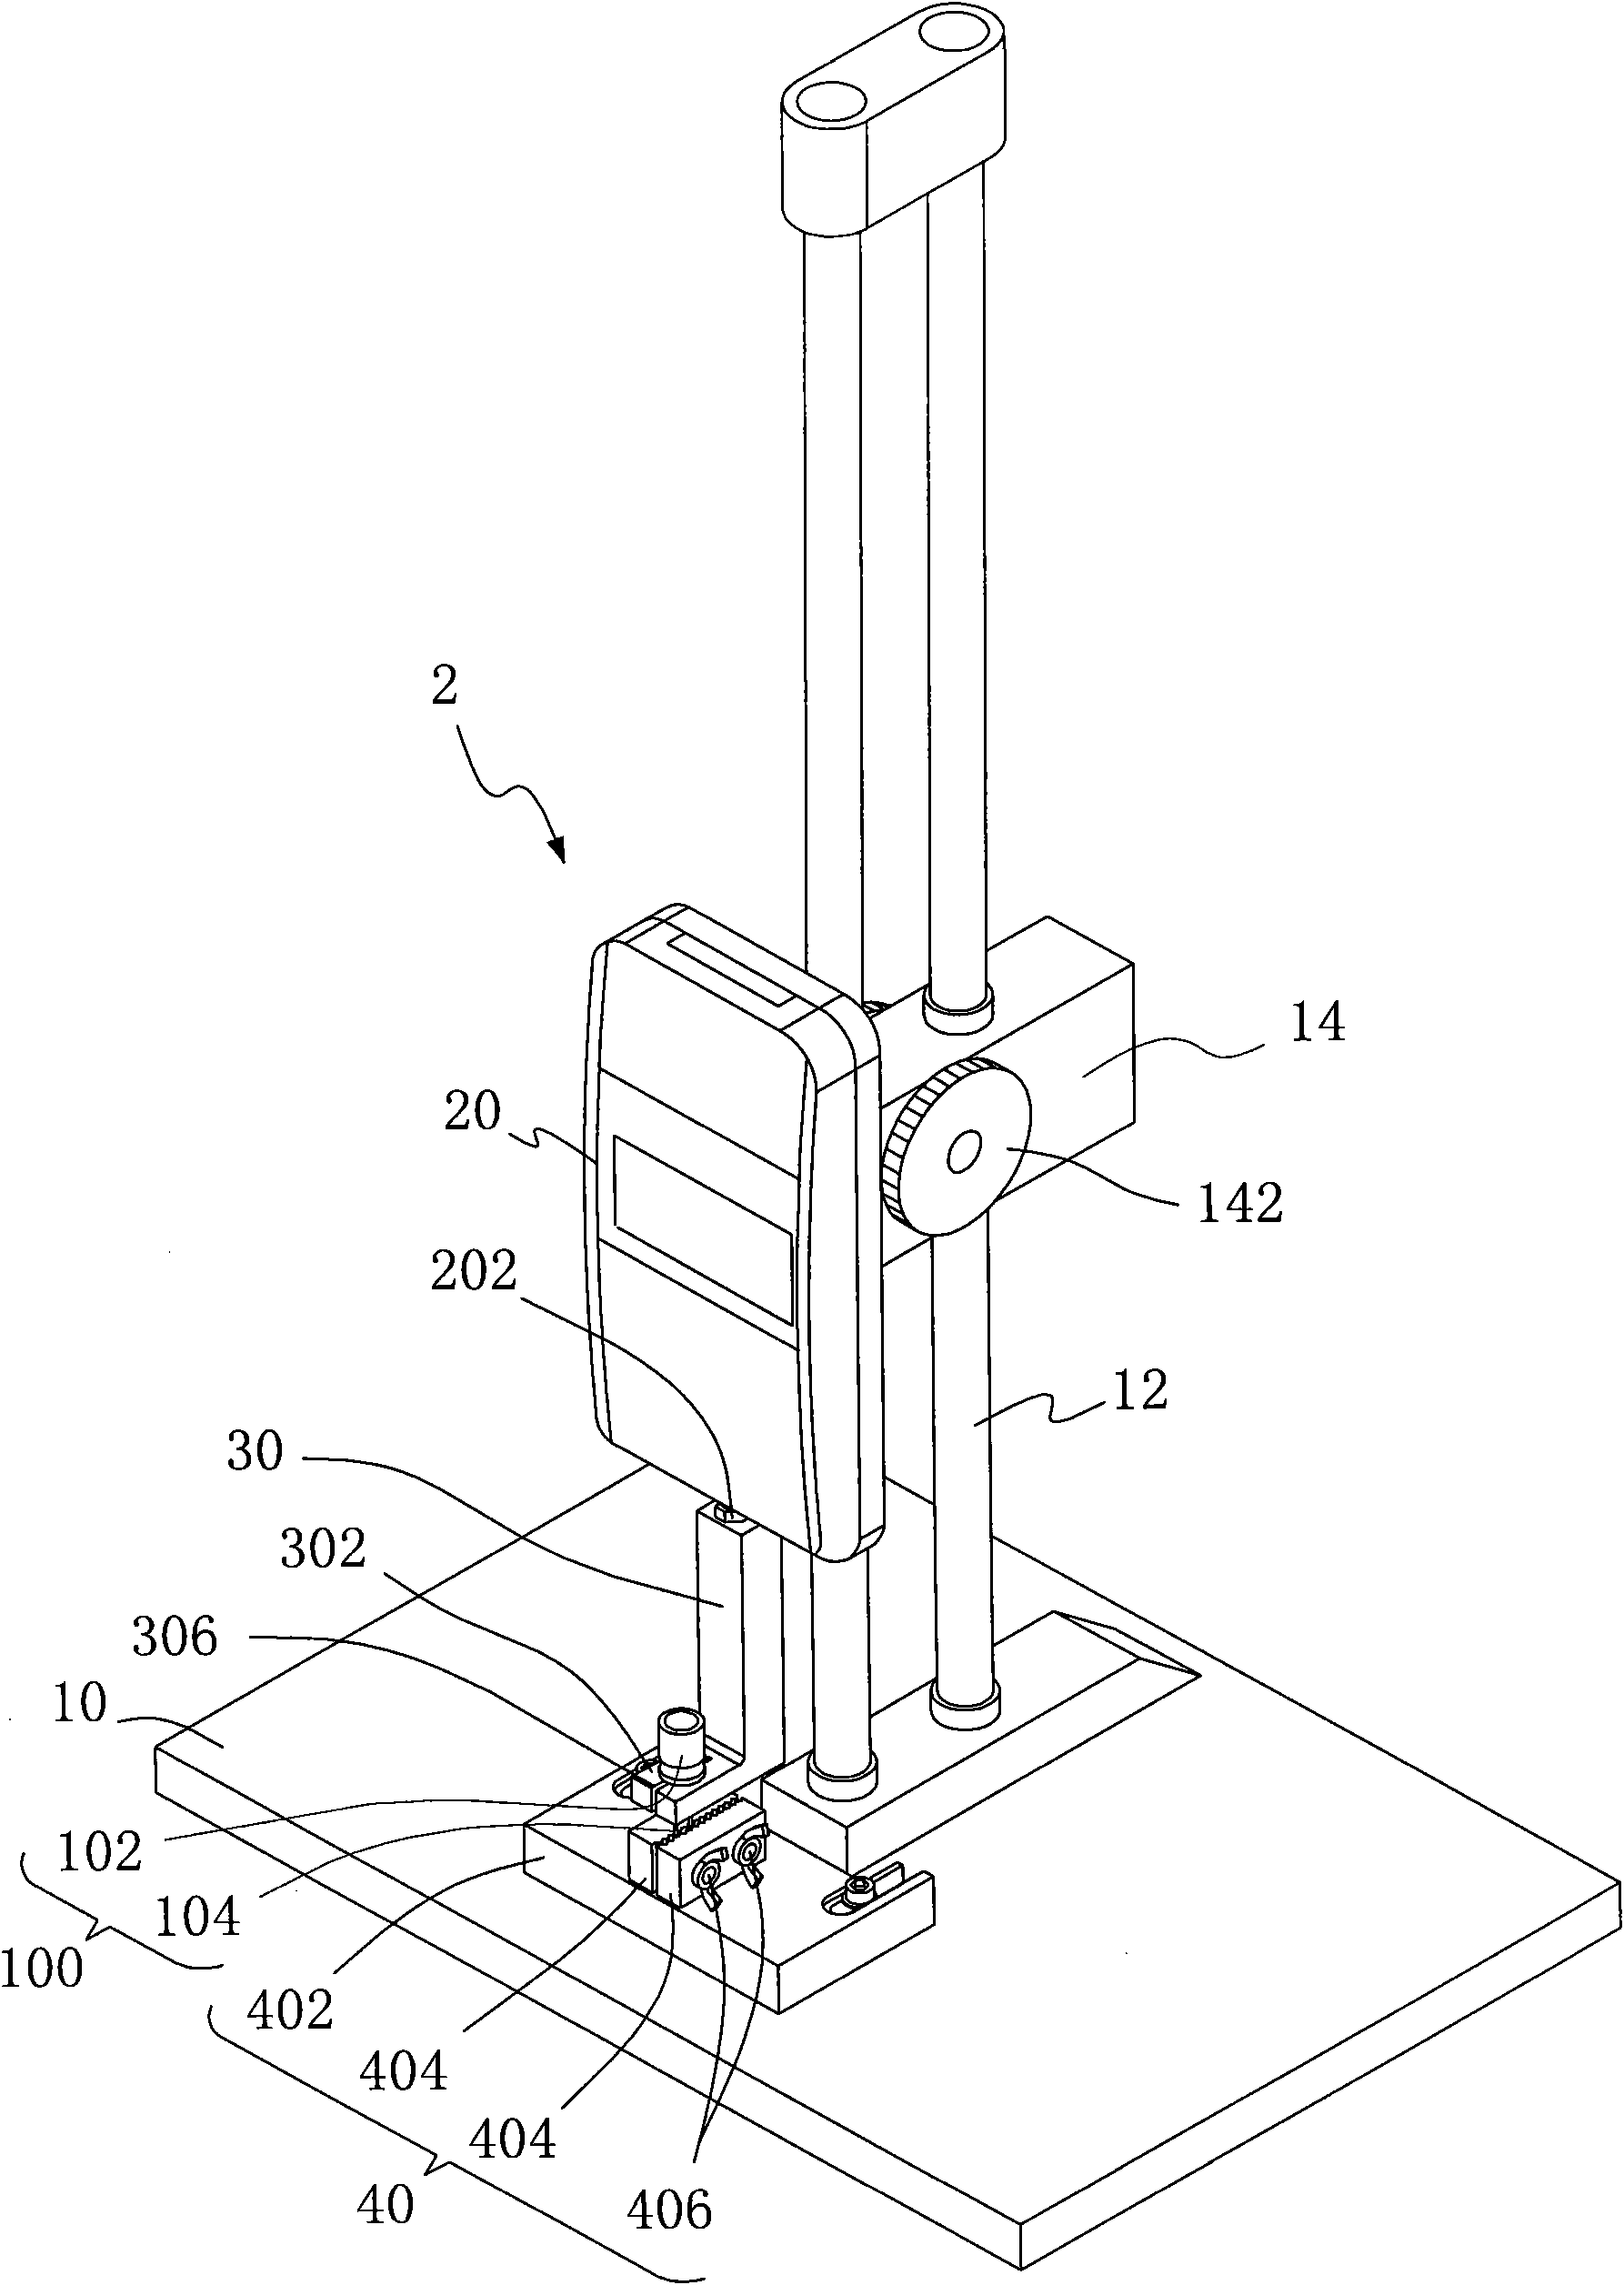 Tensile test device